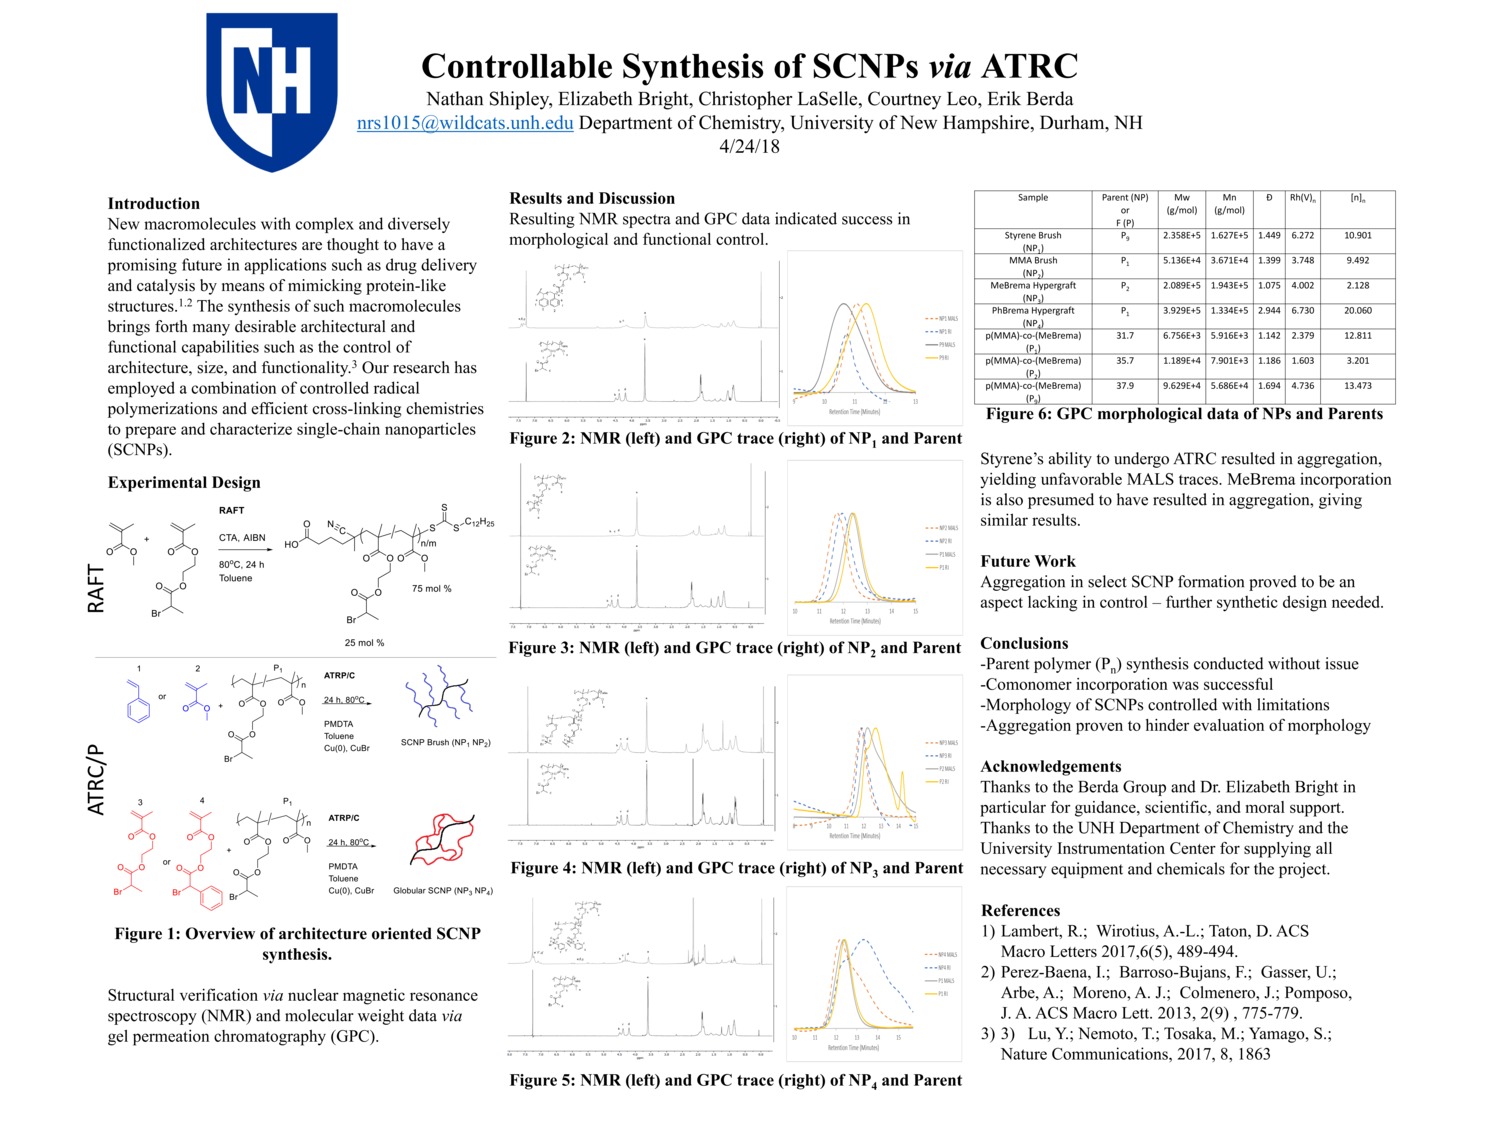 Controllable Synthesis Of Scnps Via Atrc by nrs1015